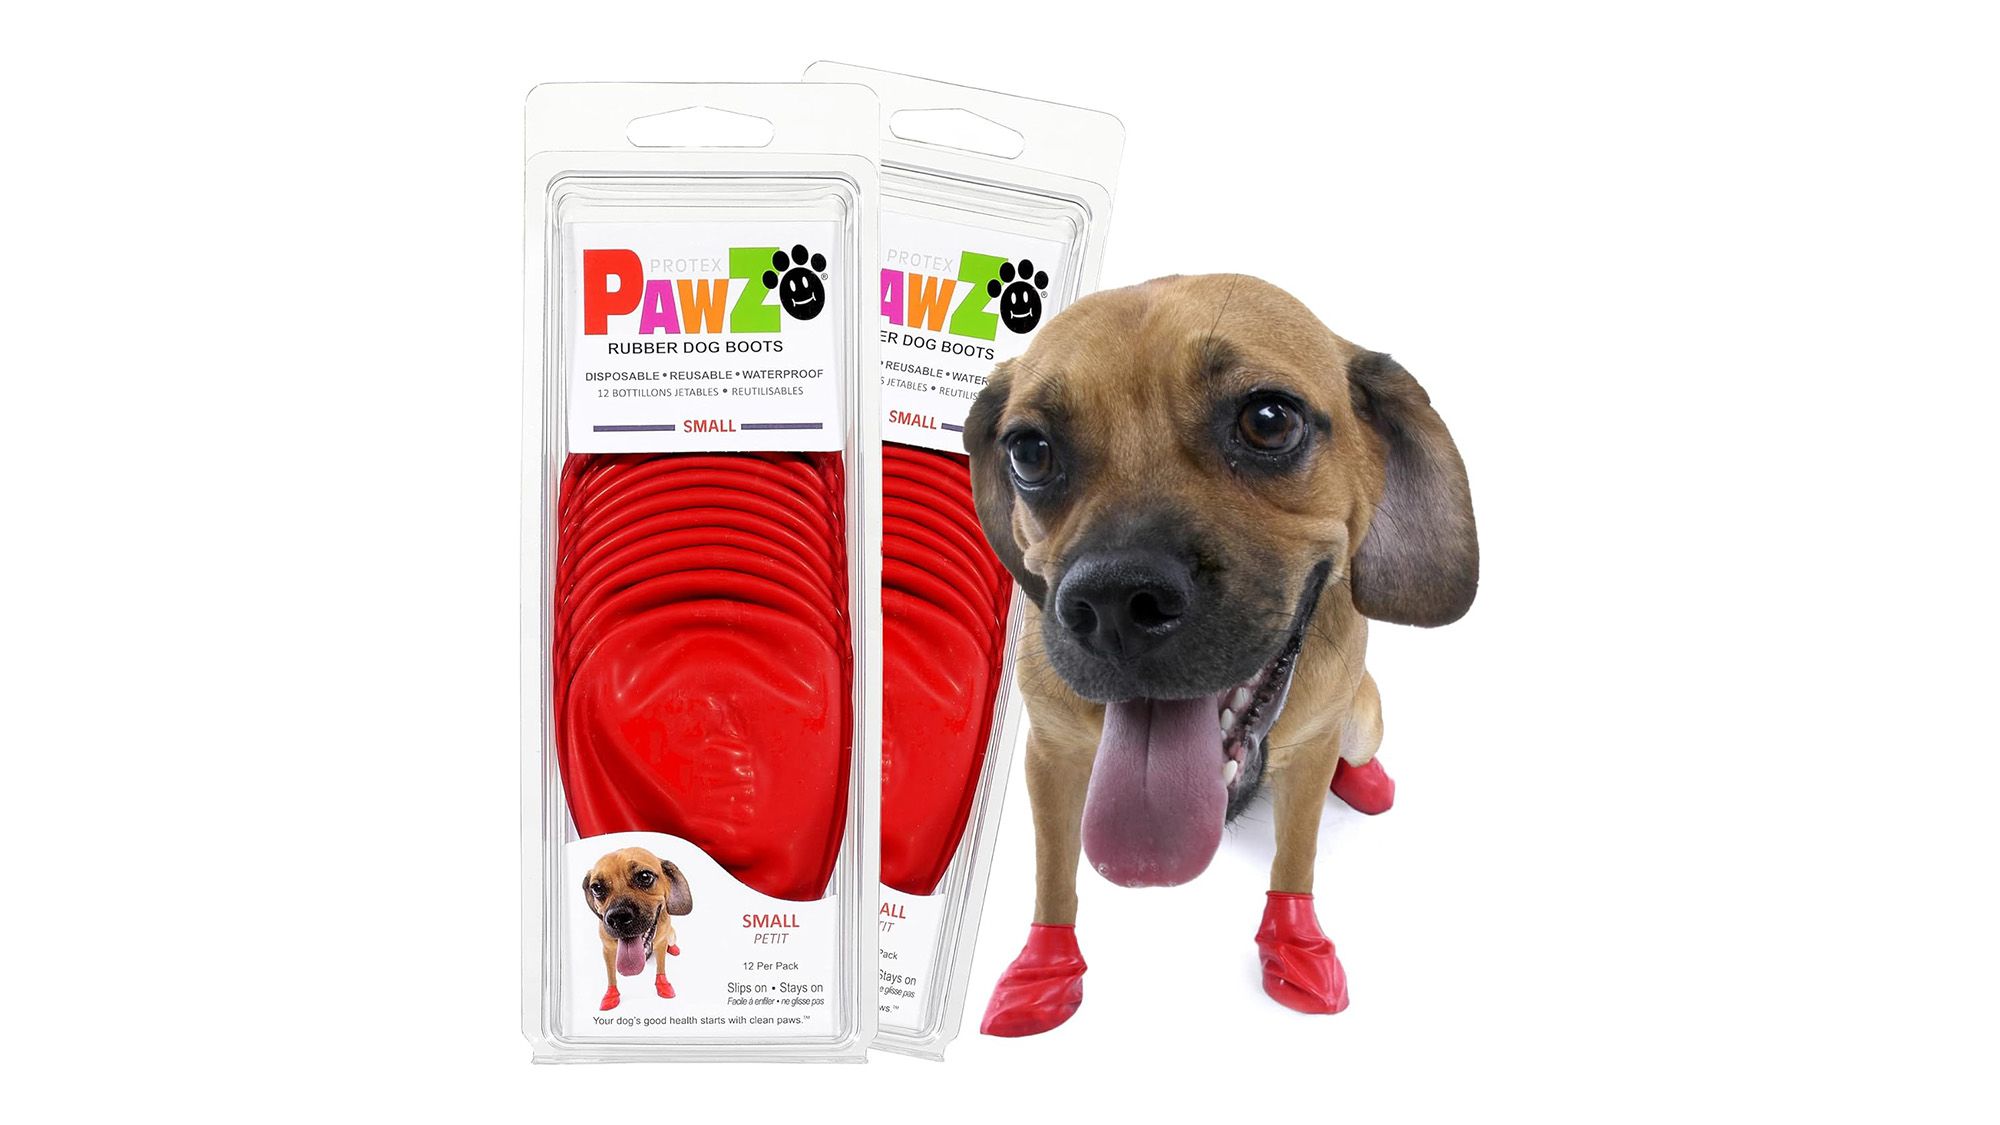 8 Best Dog Boots 2022 - Winter Shoes for Puppies and Dogs